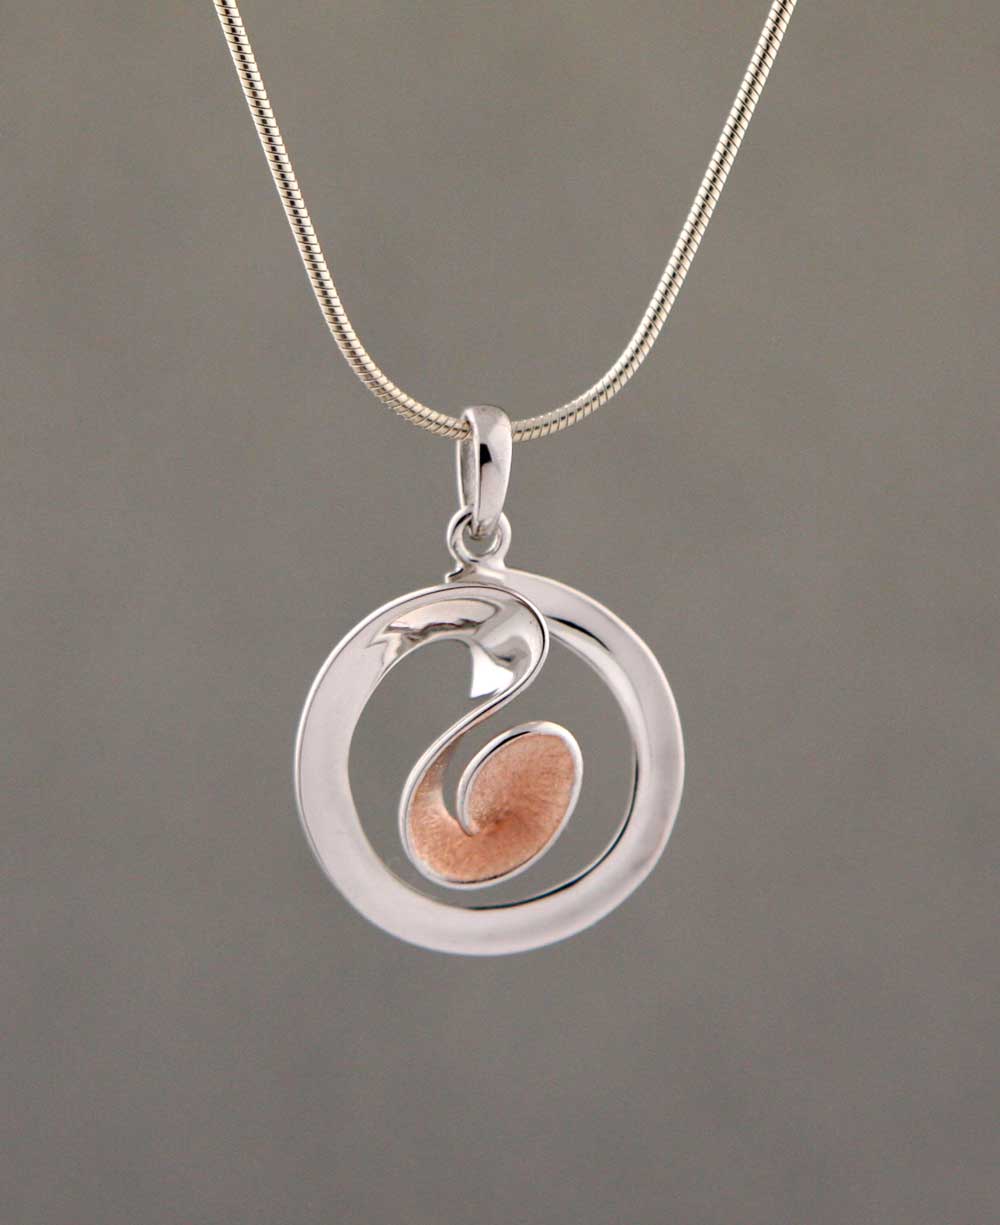 Yin Yang Swirl Pendant, Sterling Silver with Rose Gold - Charms & Pendants